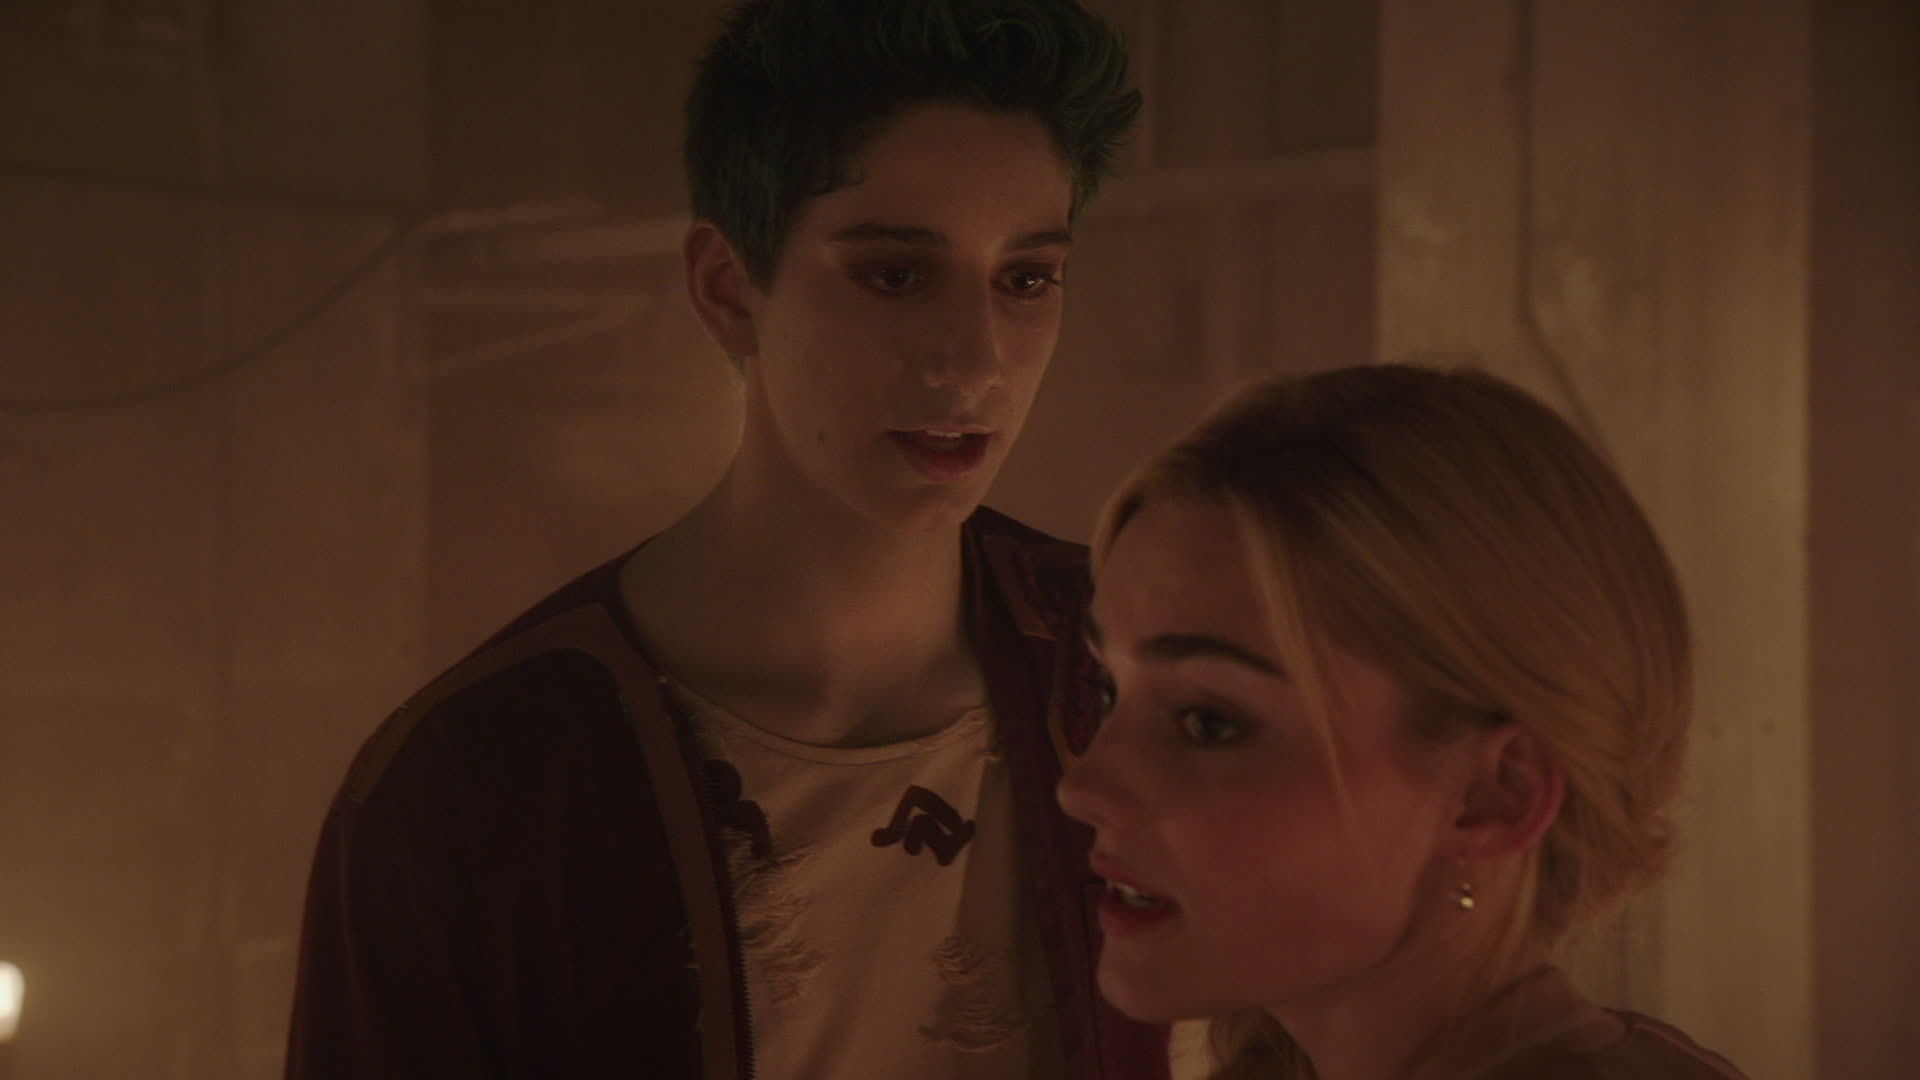 Milo Manheim, Meg Donnelly - Someday - Ballad (From "ZOMBIES")